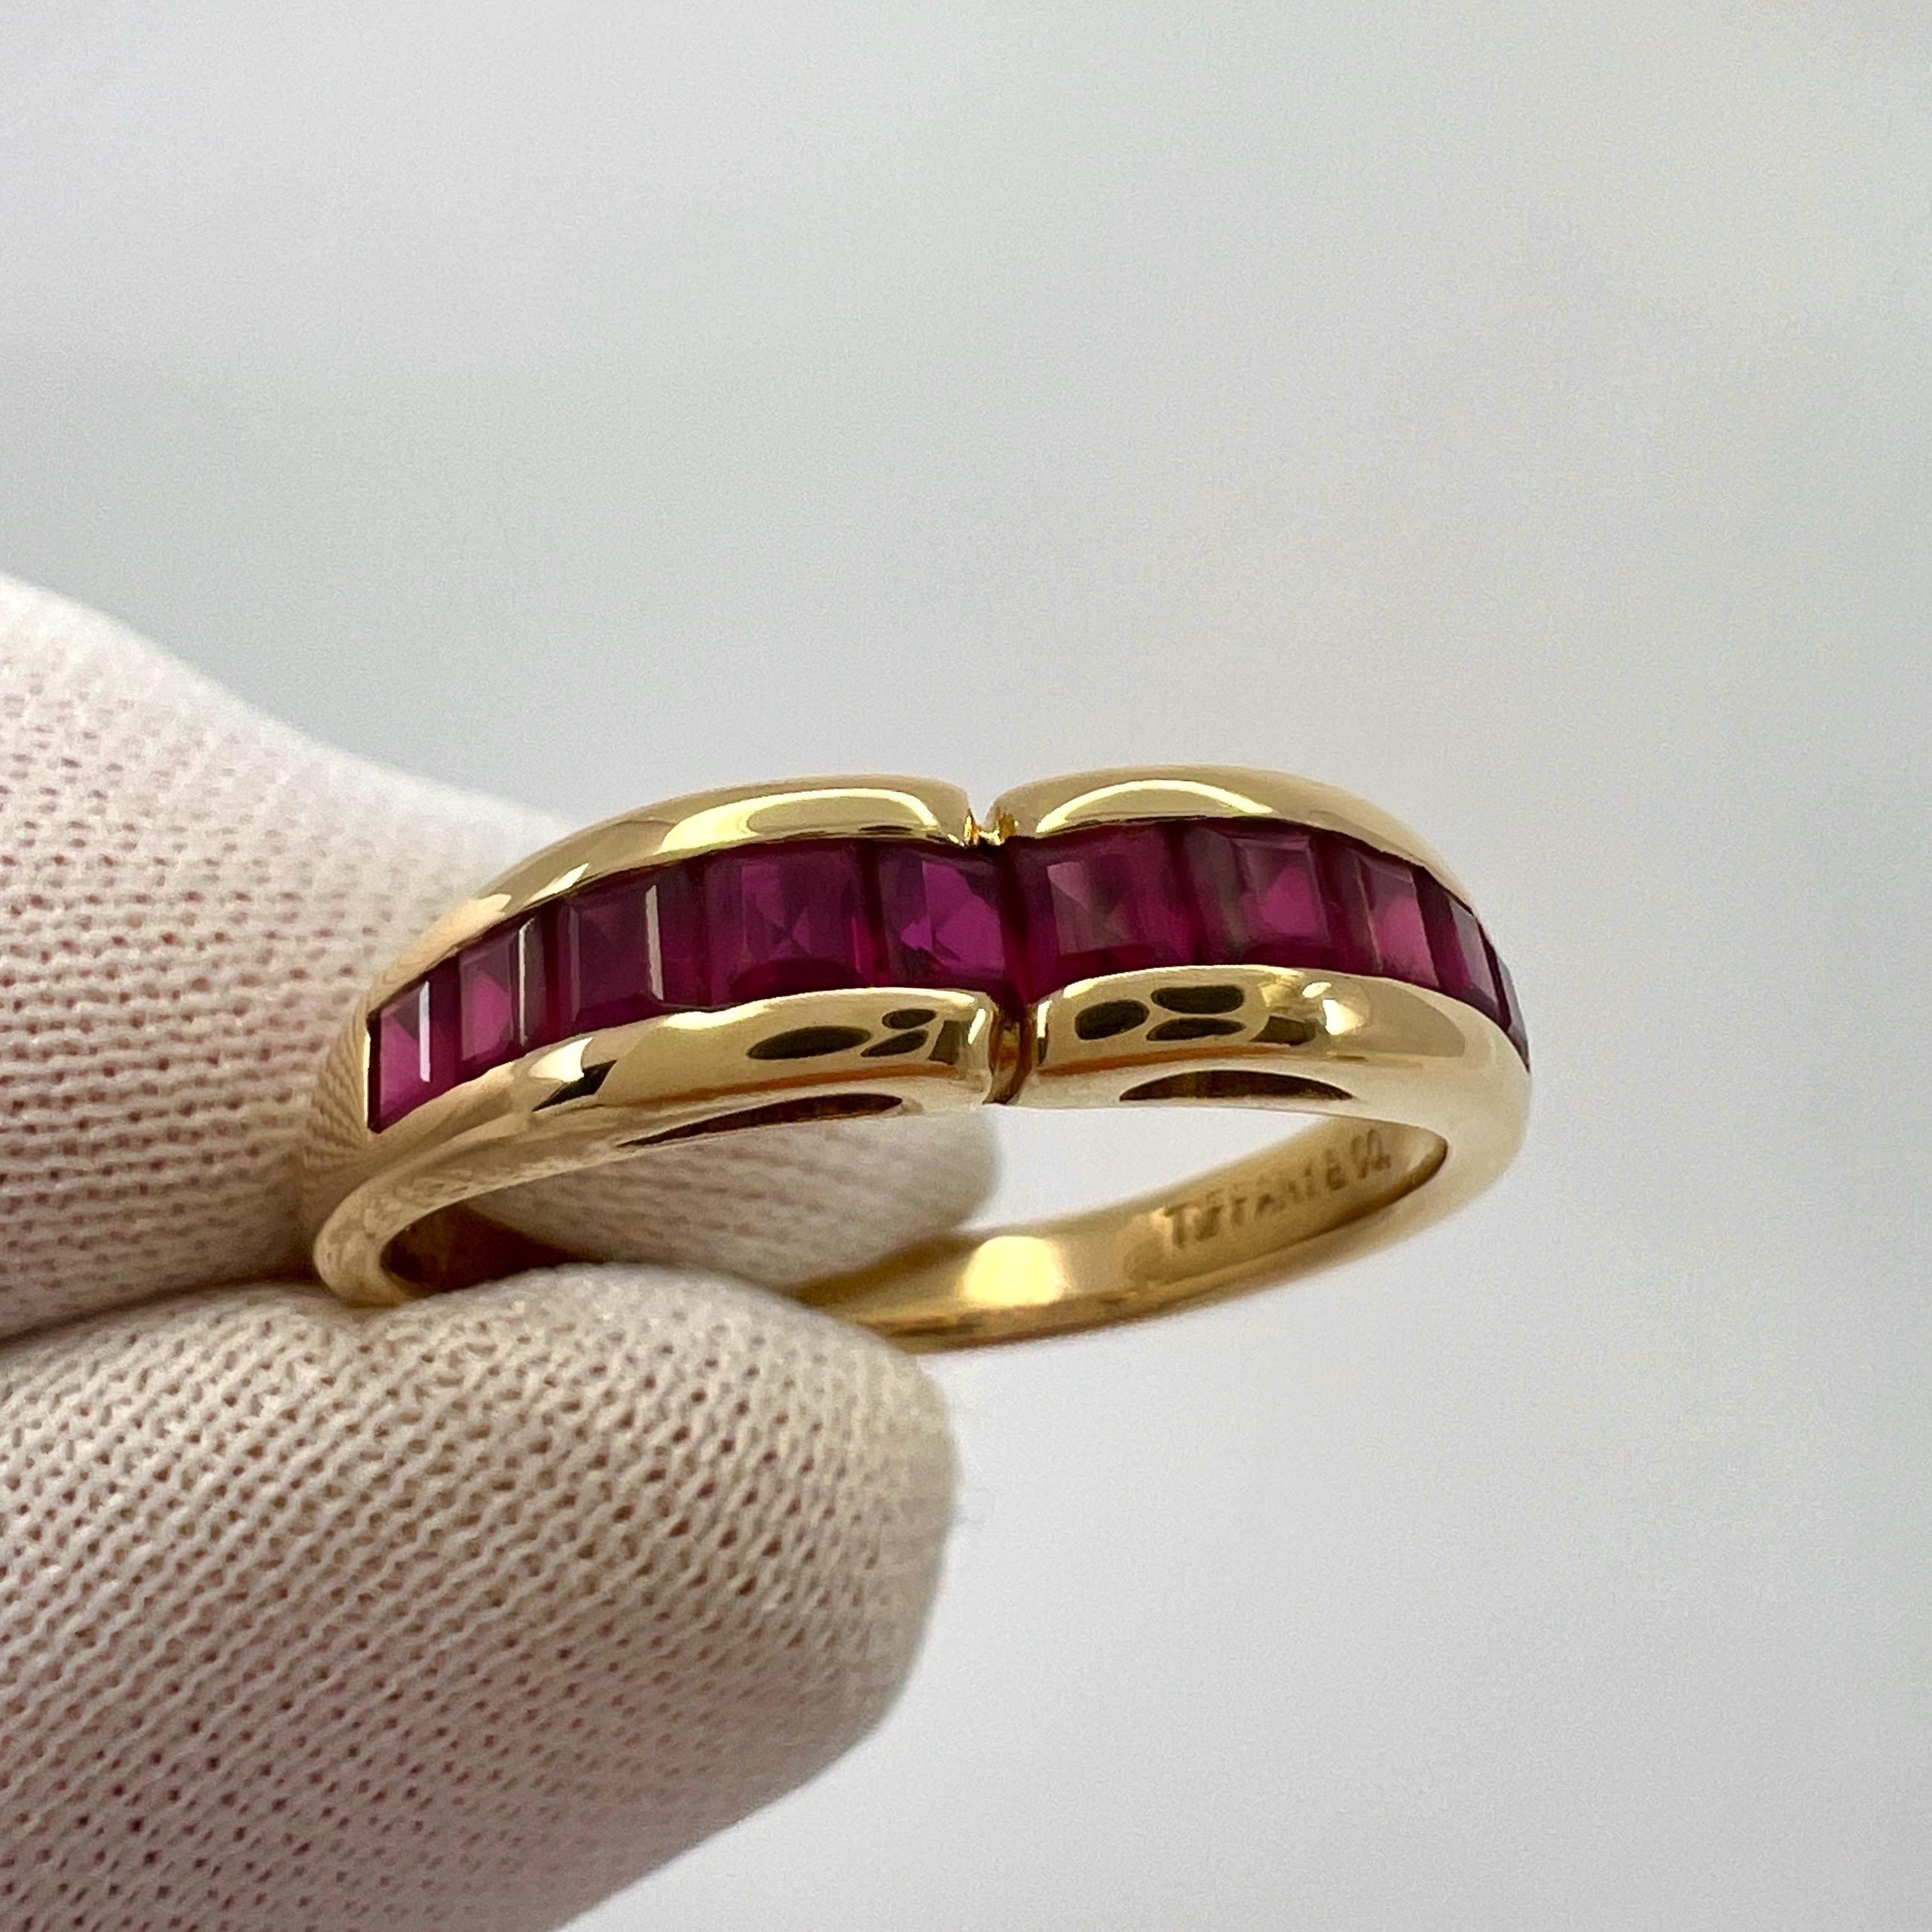 Tiffany & Co. Red Ruby Square Princess Cut 18k Yellow Gold Eternity Band Ring 1